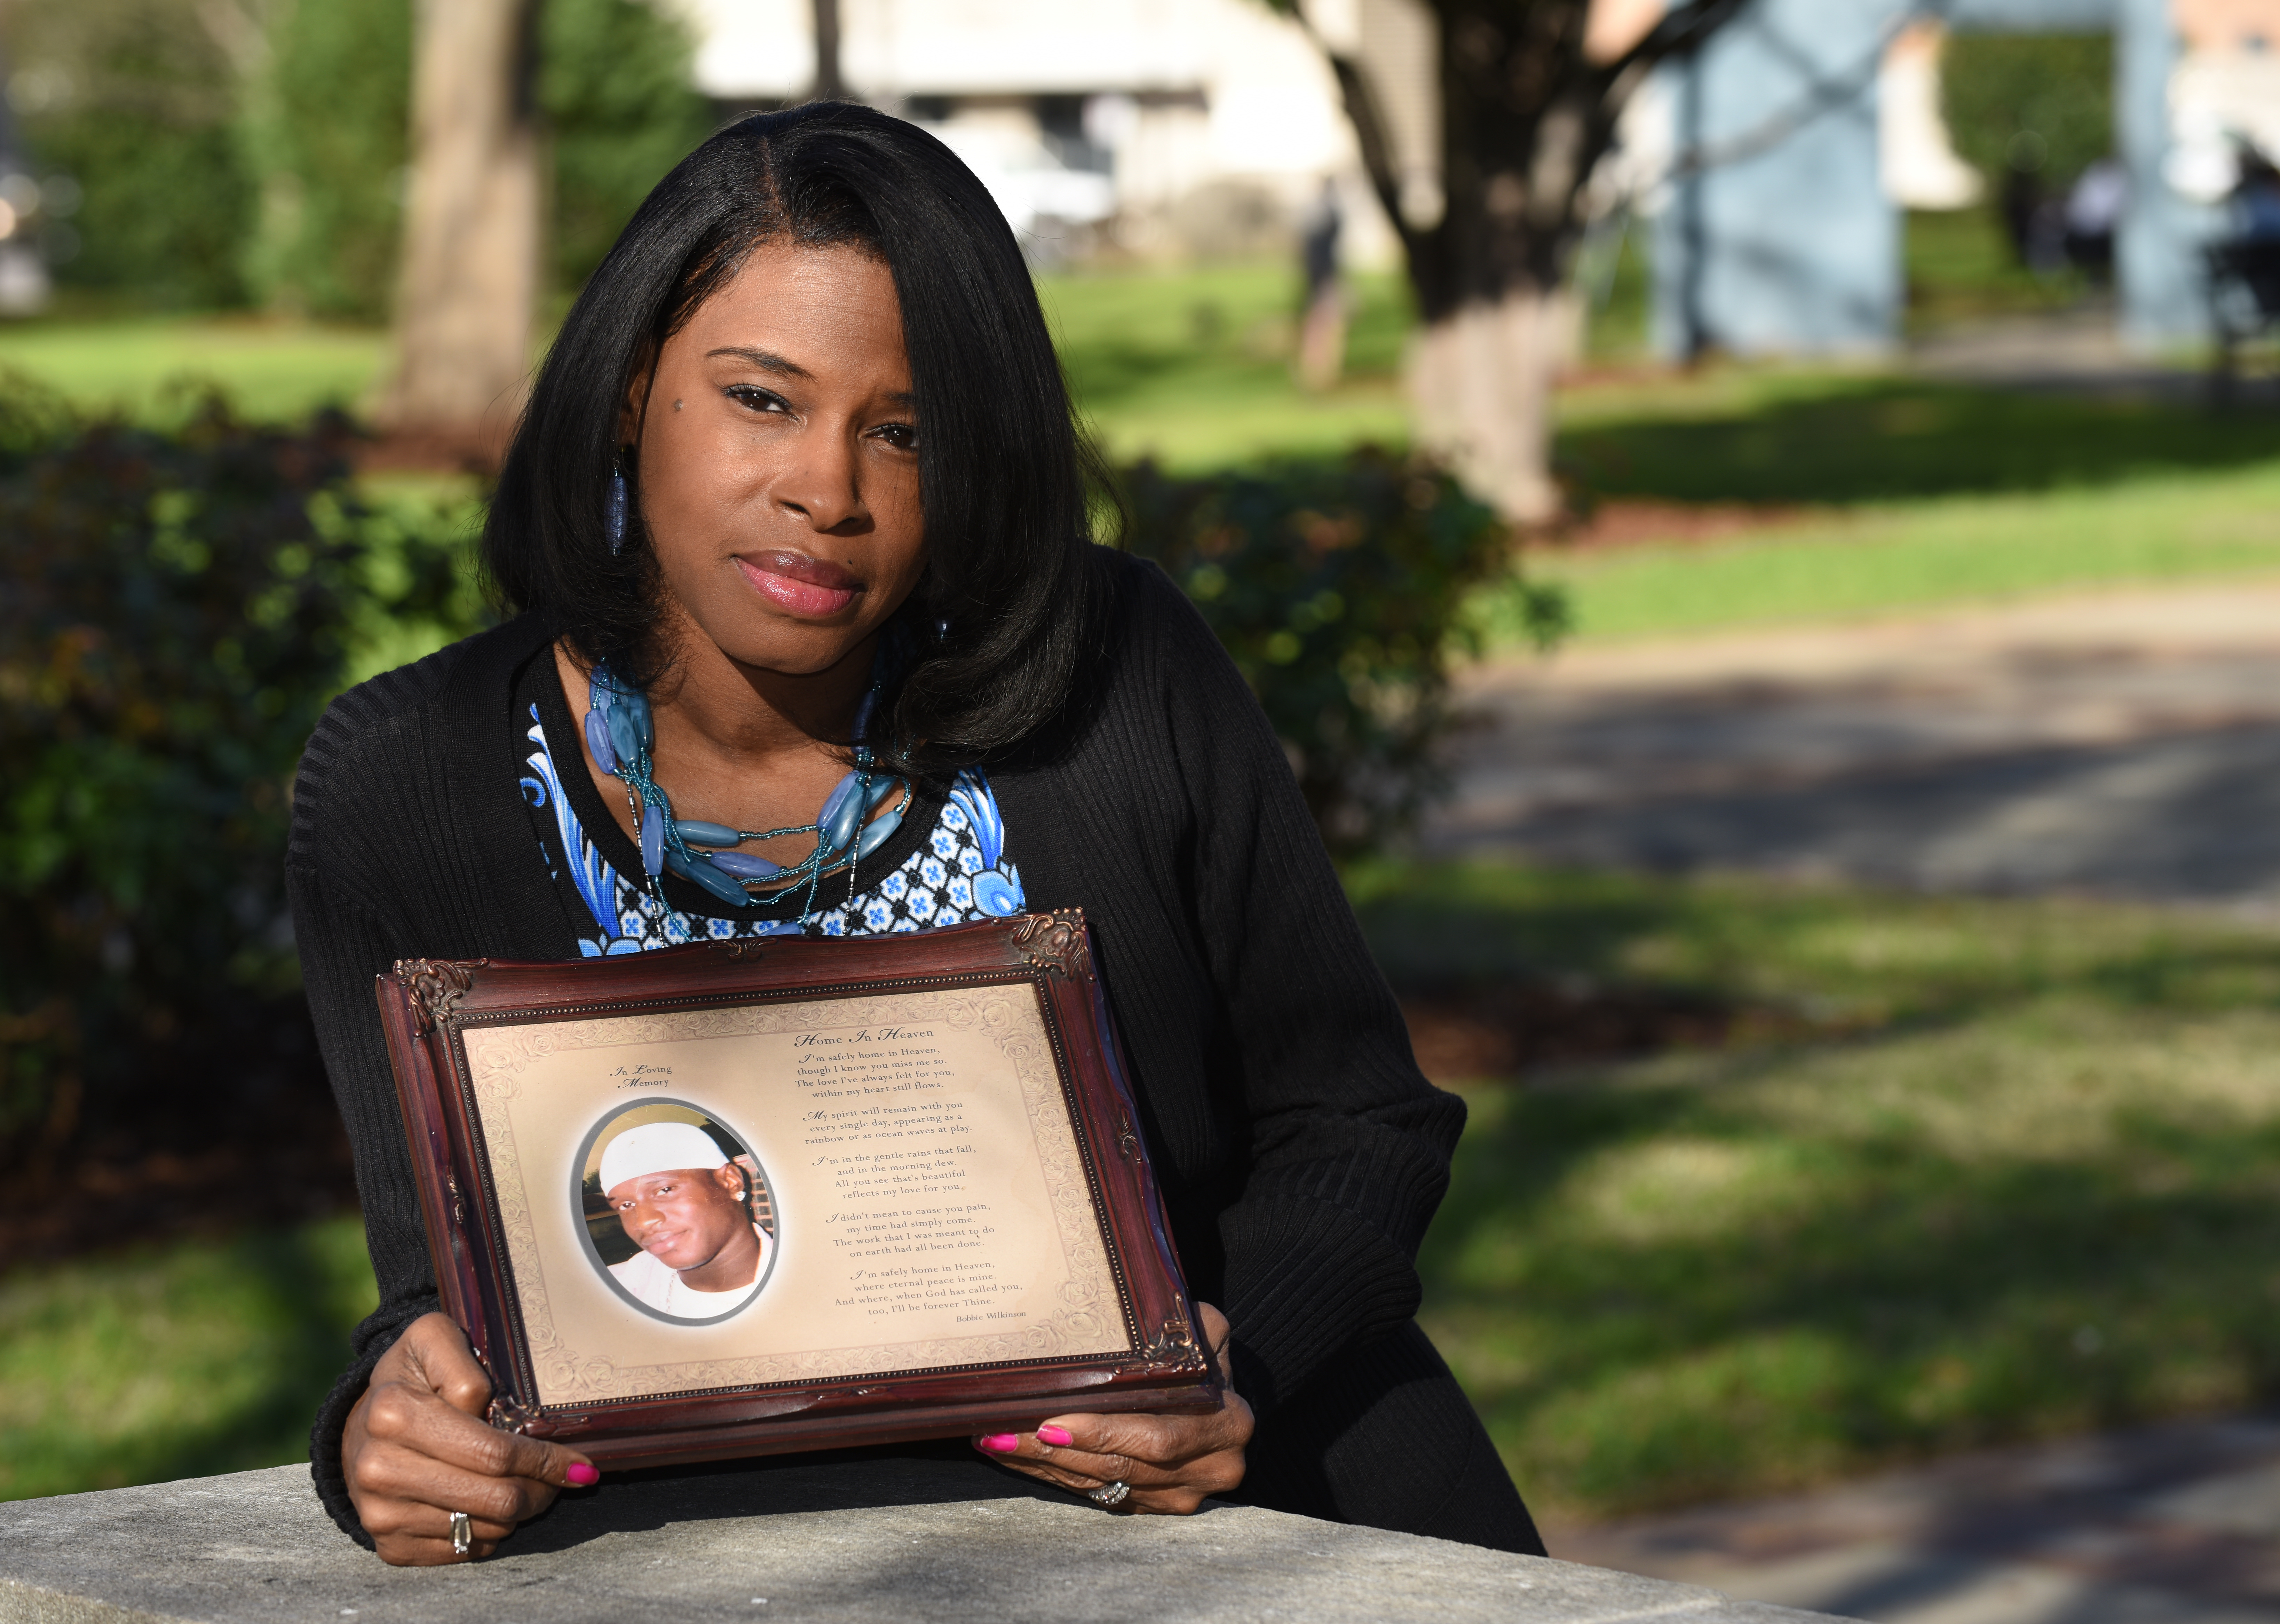 Carolyn Johnson holds a picture of her son Rodreckus Johnson who was killed as he pulled up to a birthday party. He was shot as he parked and was hit by a bullet fired by two people arguing, his killer has never been arrested. (Frank Couch / The Birmingham Times)